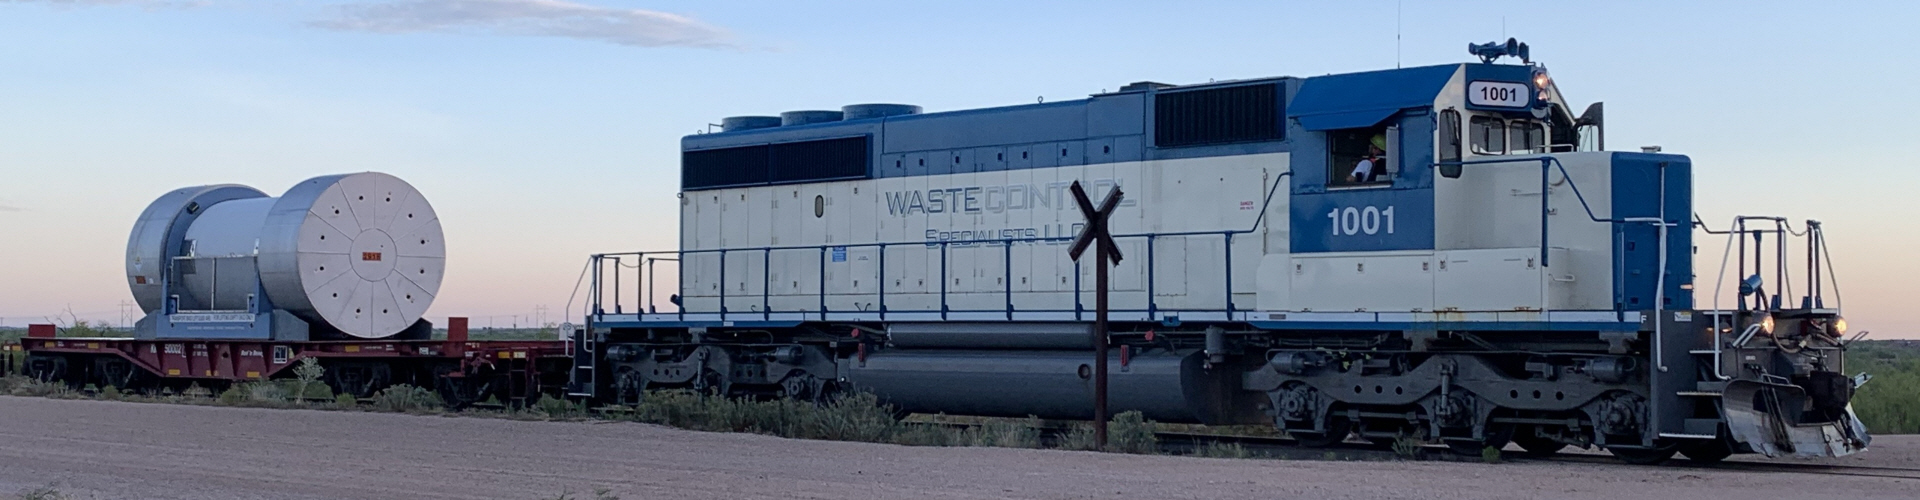 VY_WCS_MP197HB_train-engine-banner